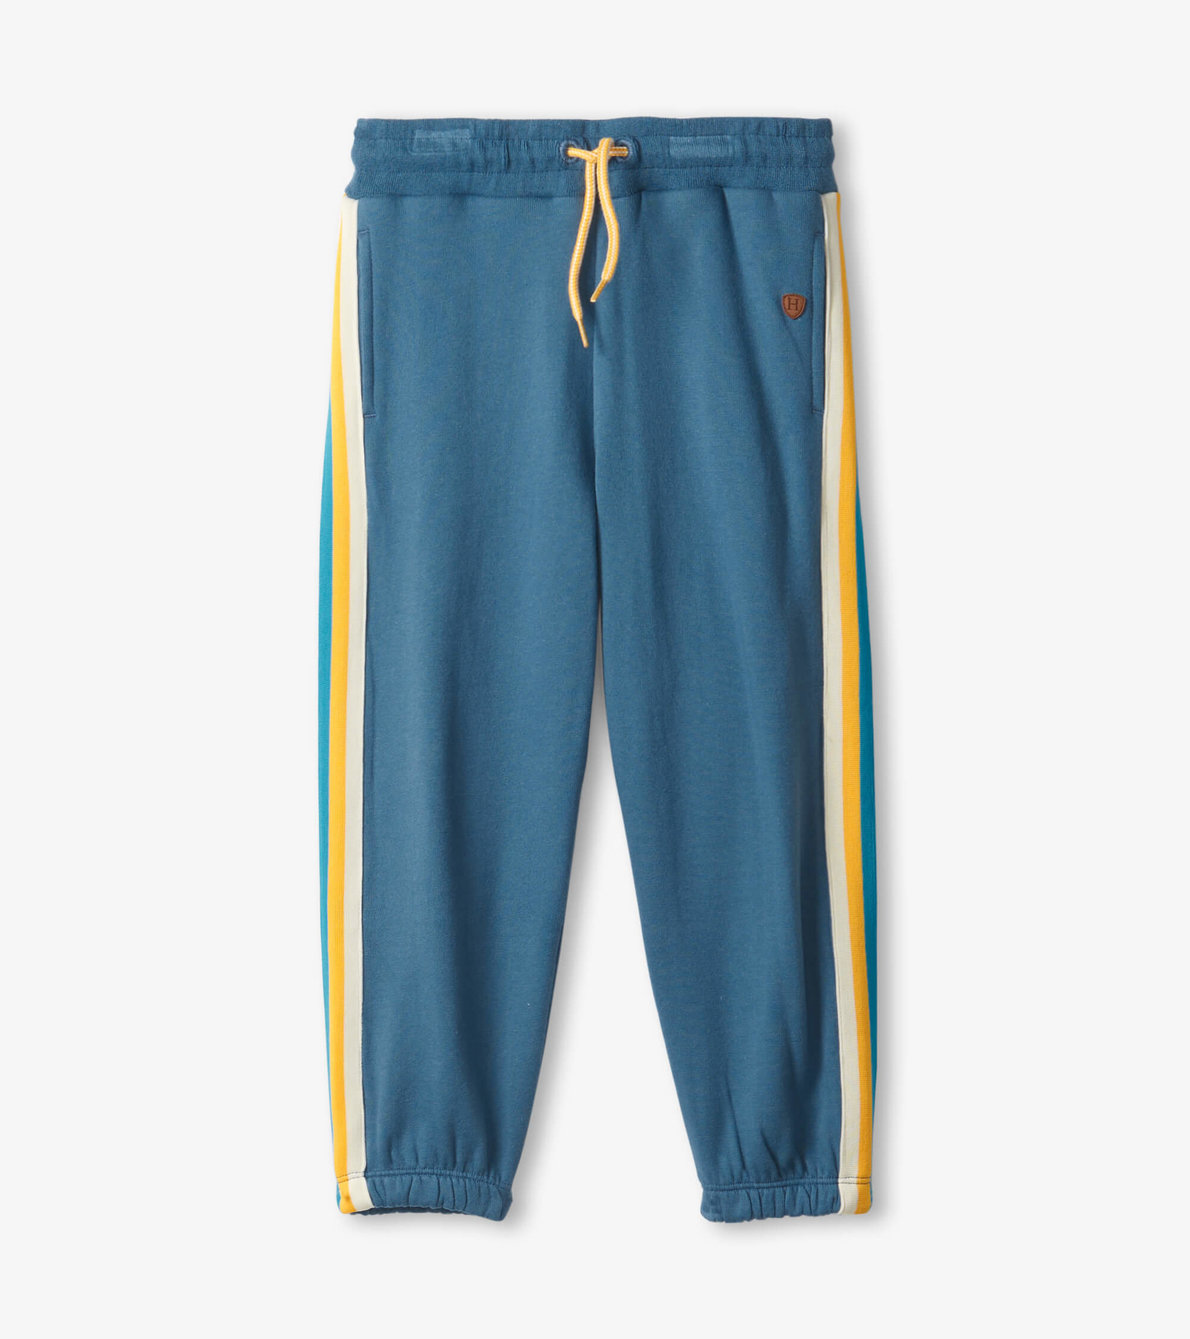 View larger image of Boys Striped Baggy Track Pants